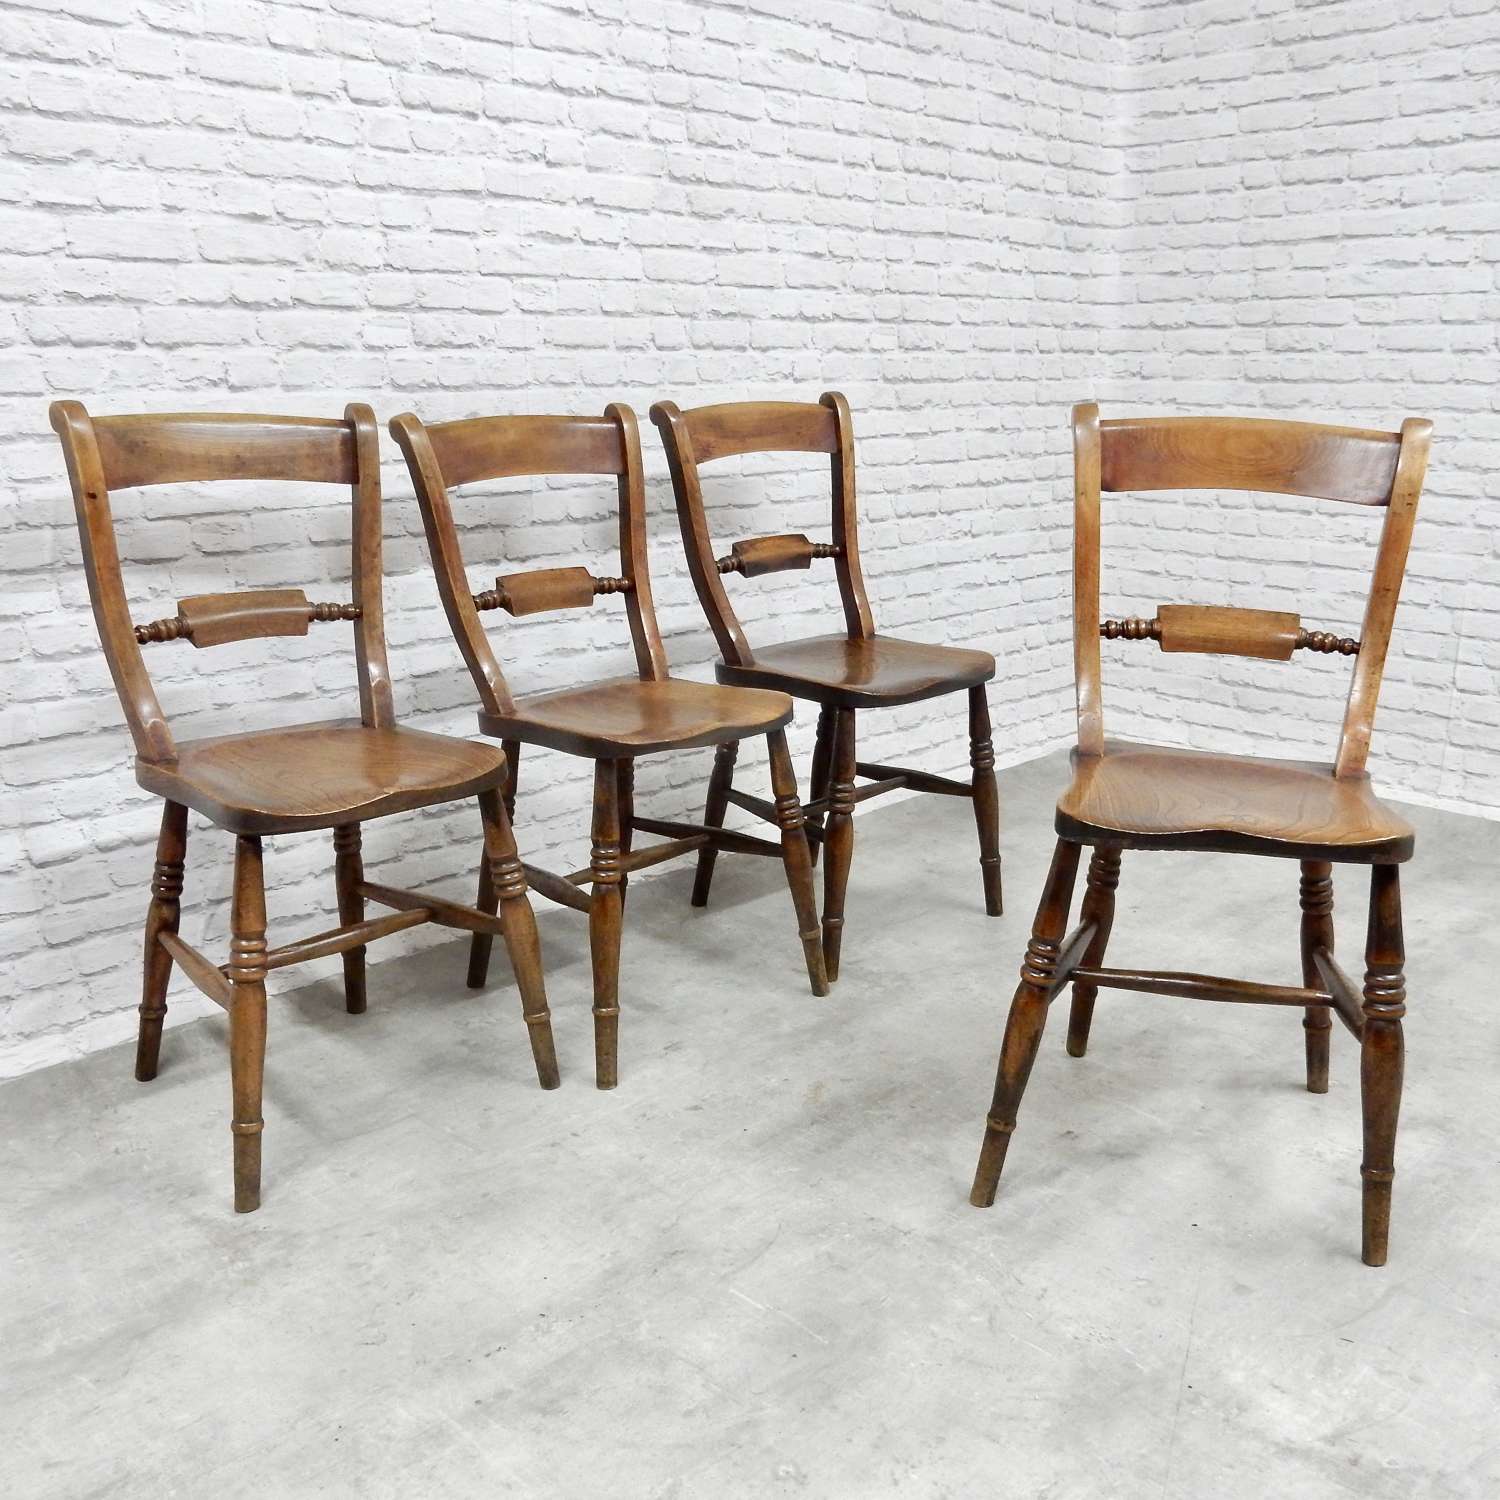 Antique Windsor Oxford Chairs